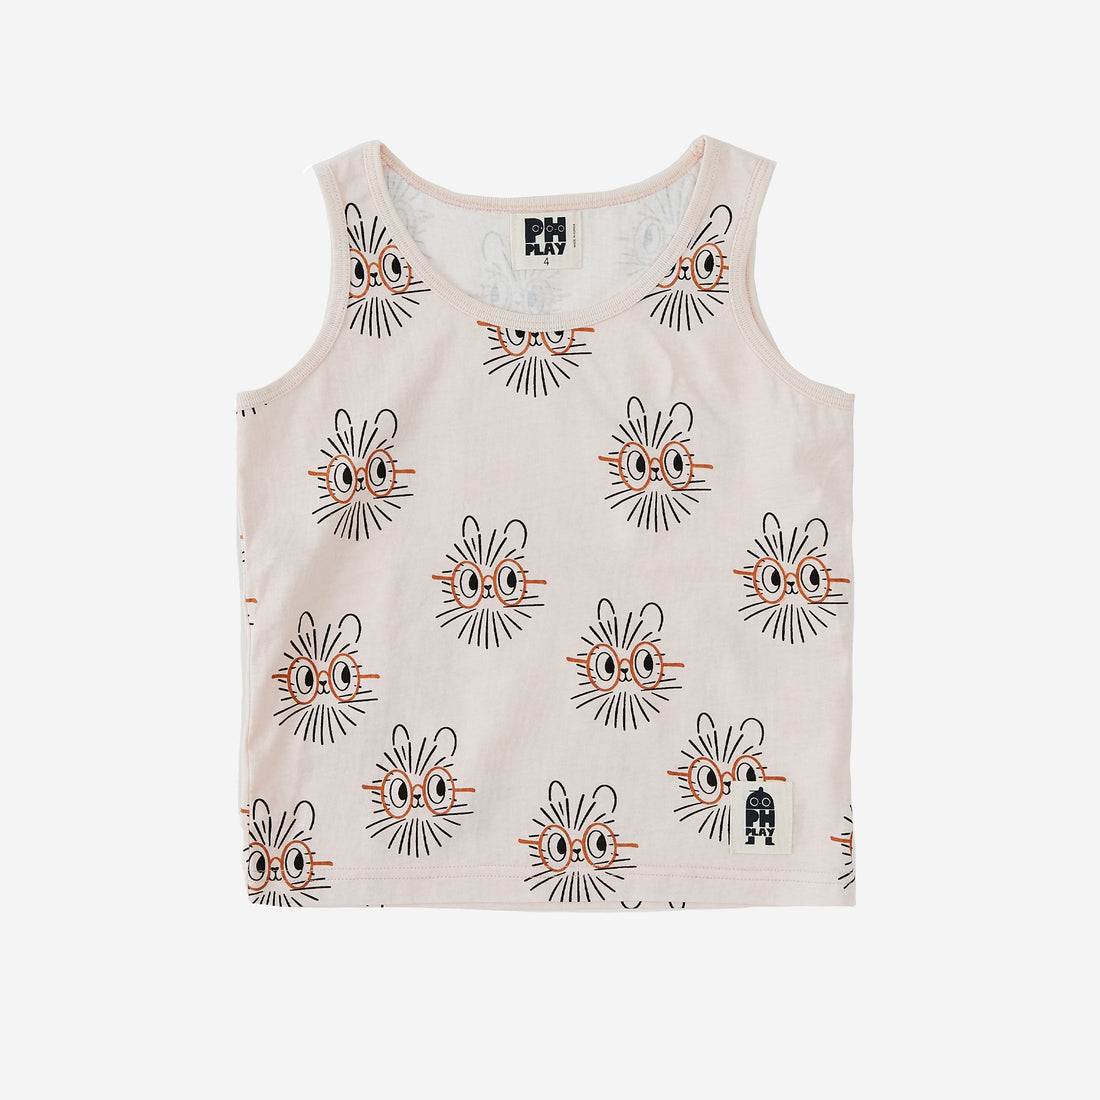 The Hedgehog print tanktop has a light peach background with abstract hedgehog faces with orange oval eye glasses.